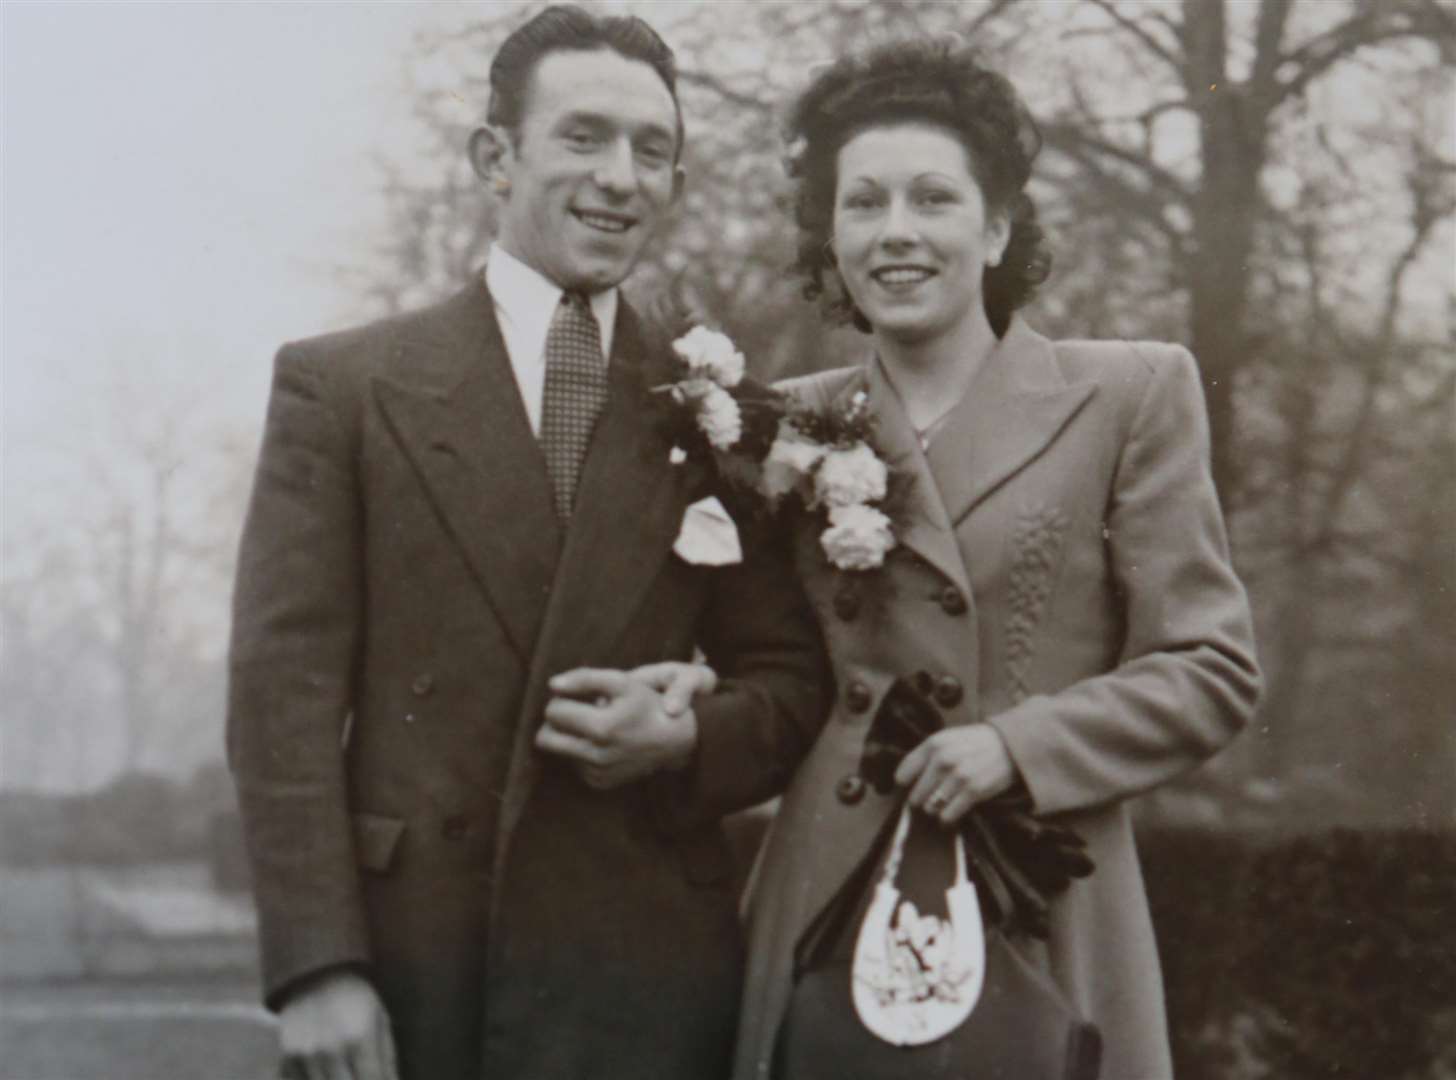 The happy couple on their wedding day in 1949